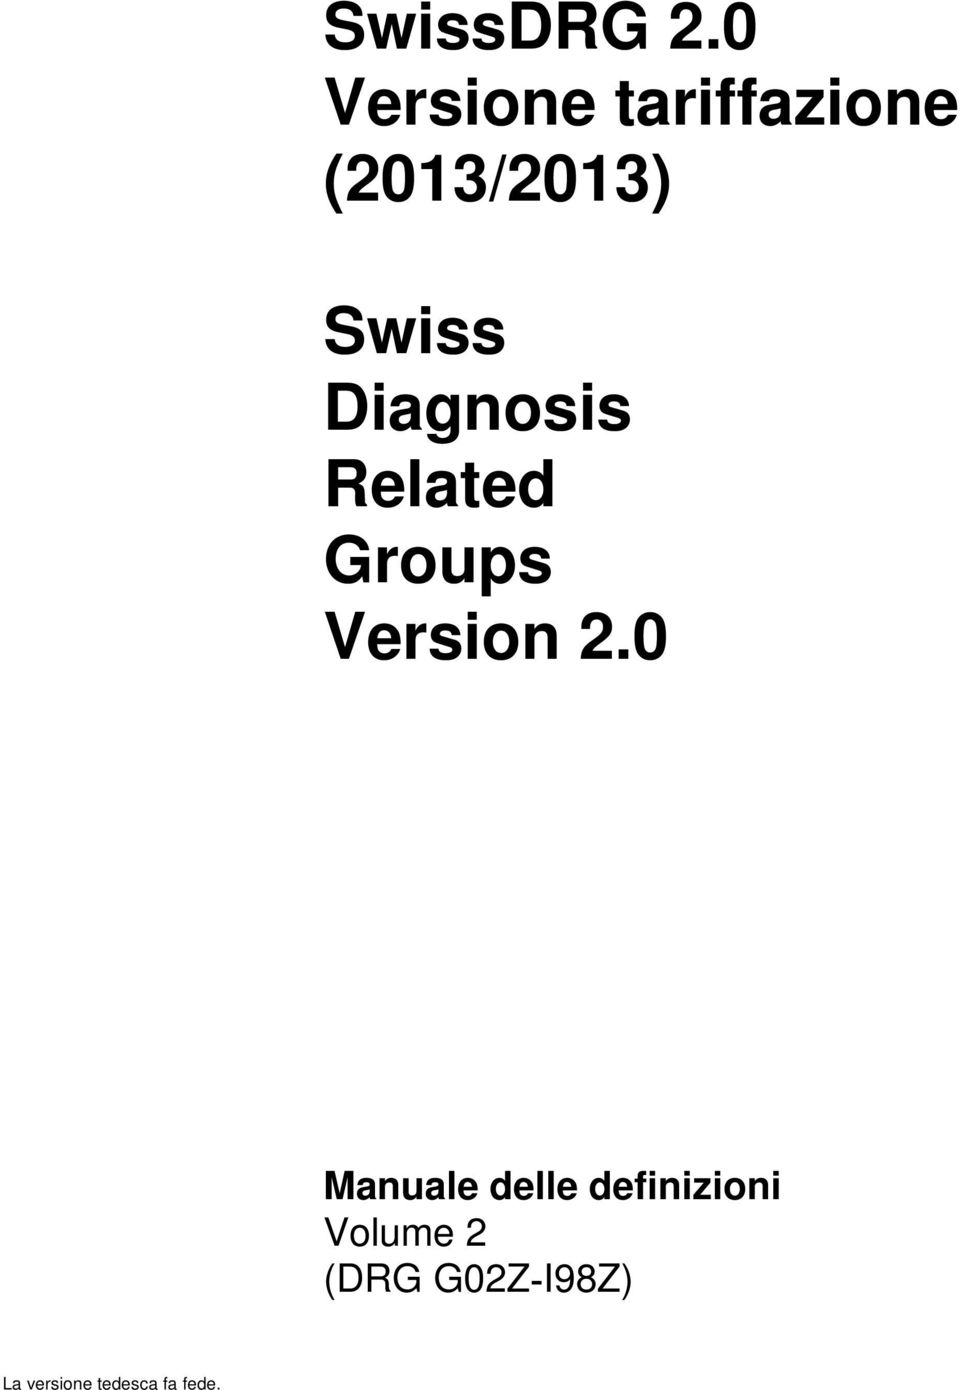 Diagnosis Related Groups Version 2.